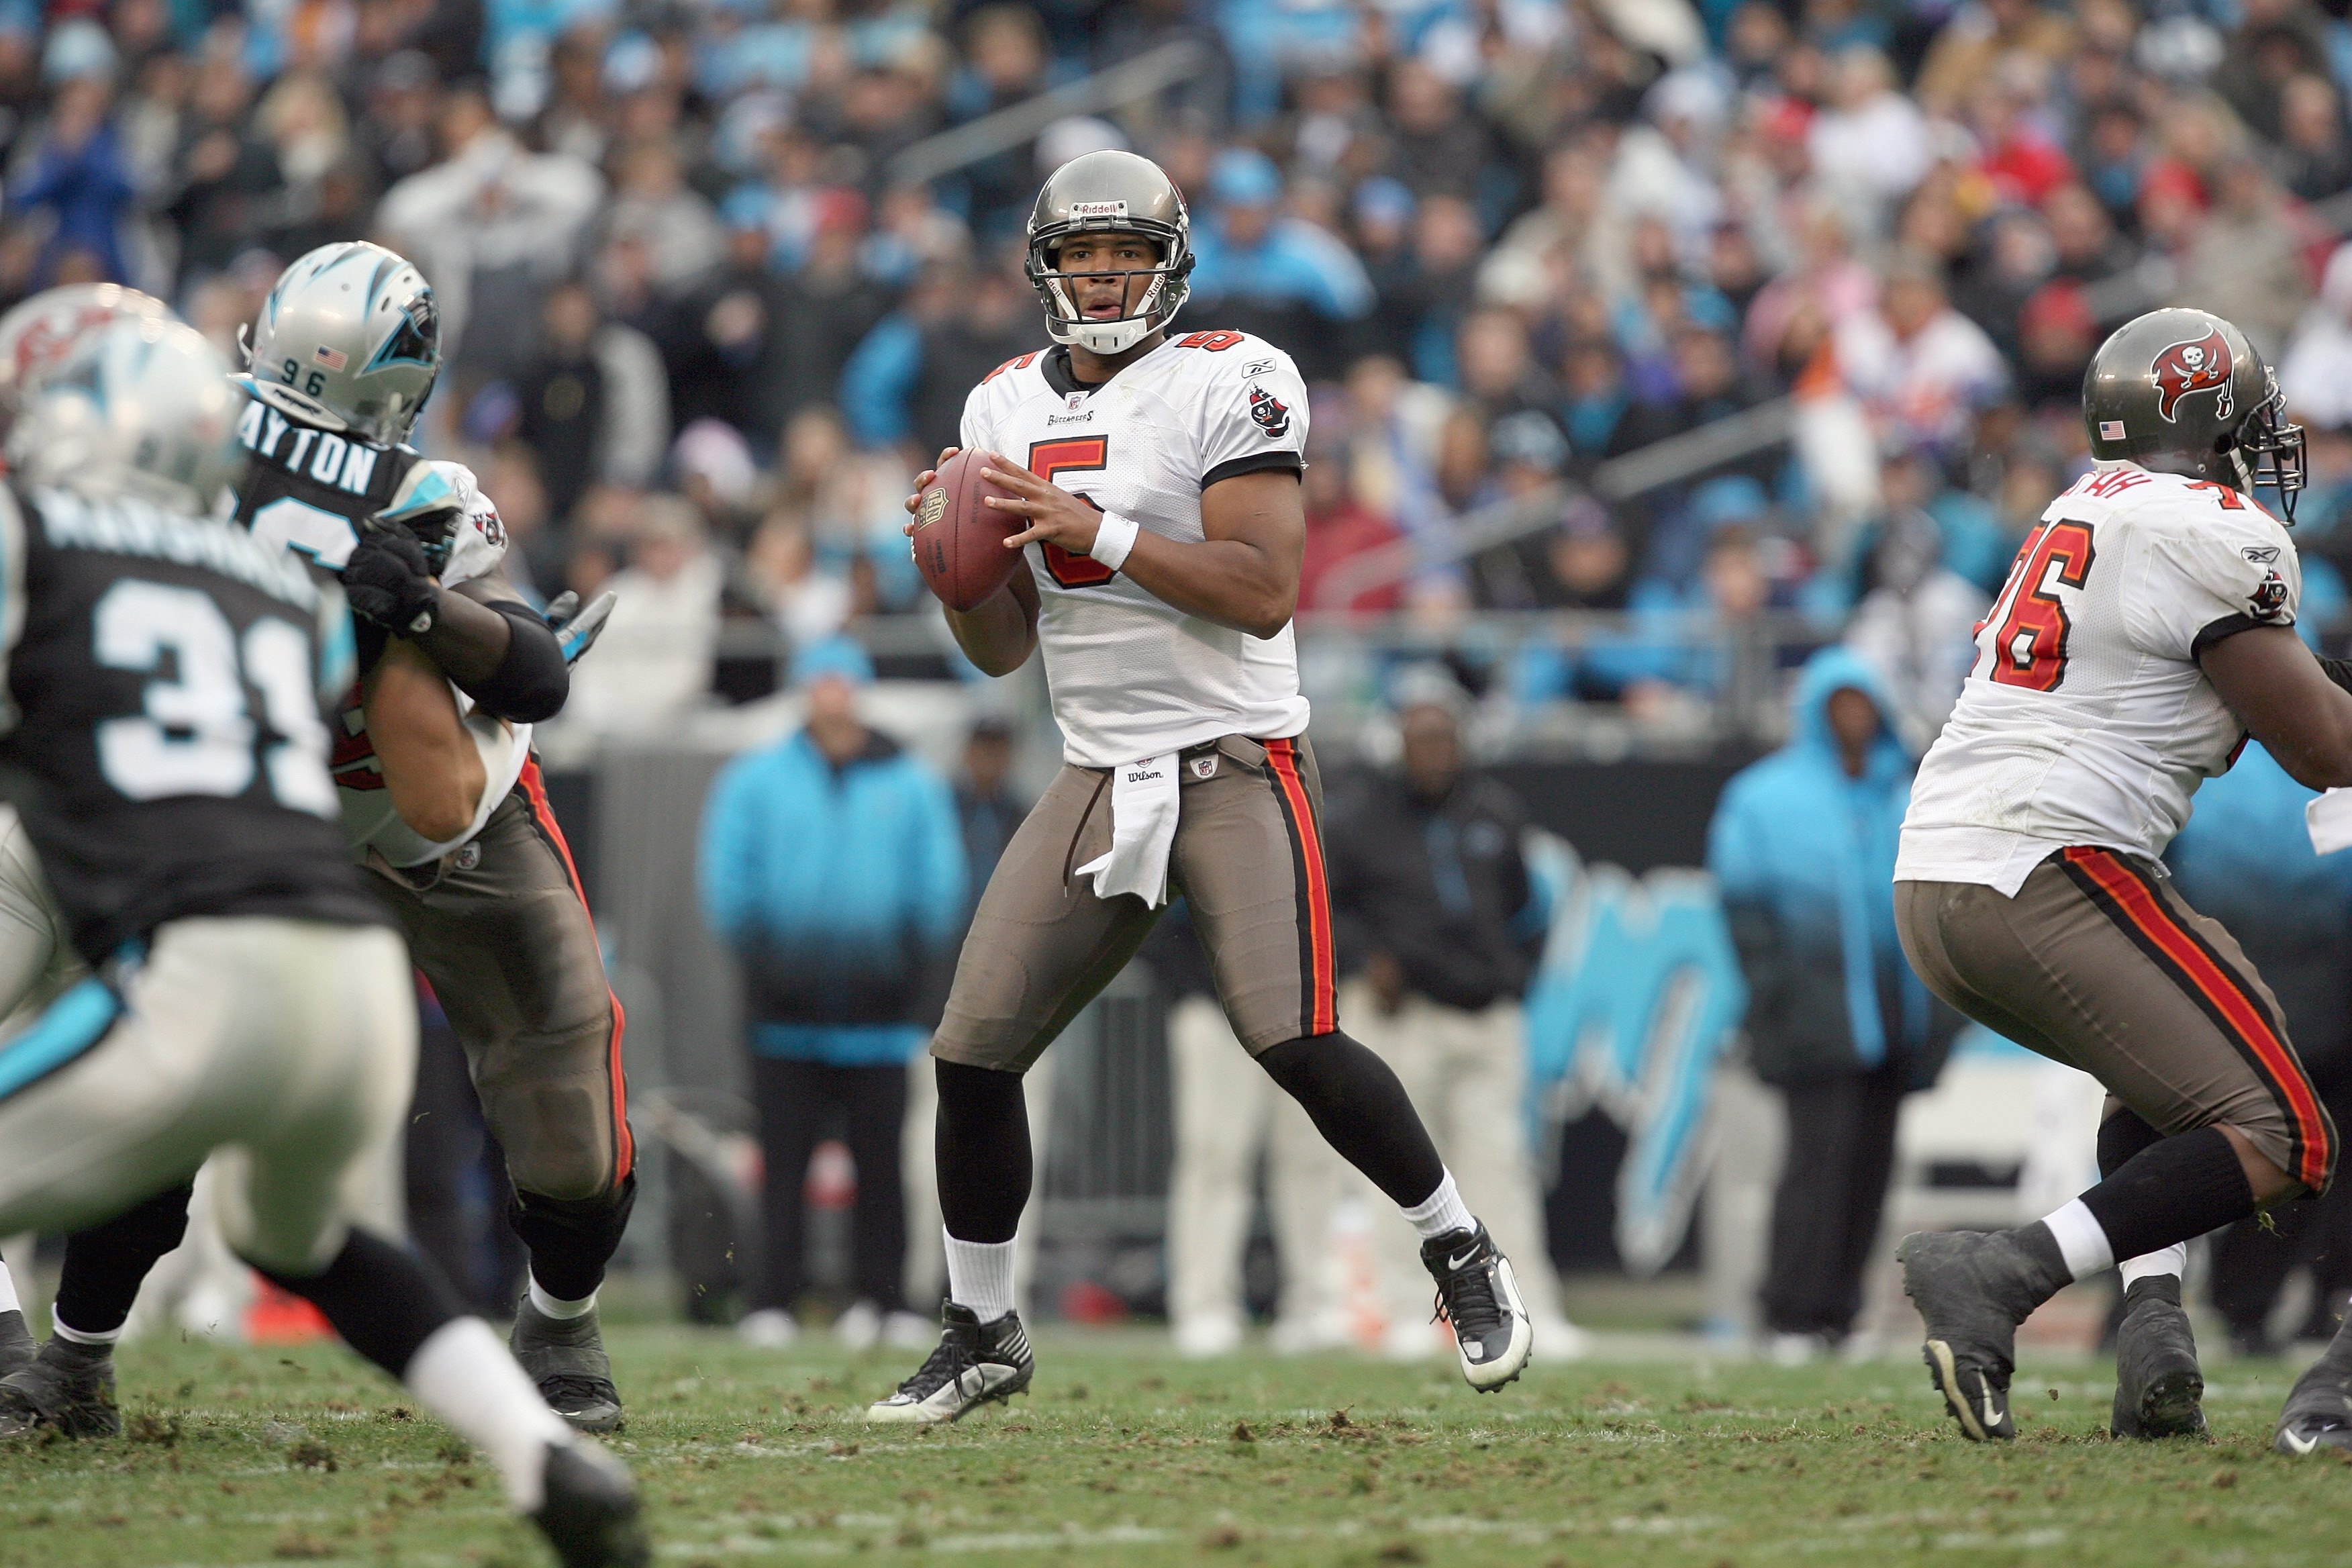 CHARLOTTE, NC - DECEMBER 06:  Josh Freeman #5 of the Tampa Bay Buccaneers looks to pass during the game against the Carolina Panthers at Bank of America Stadium on December 6, 2009 in Charlotte, North Carolina.  (Photo by Streeter Lecka/Getty Images)